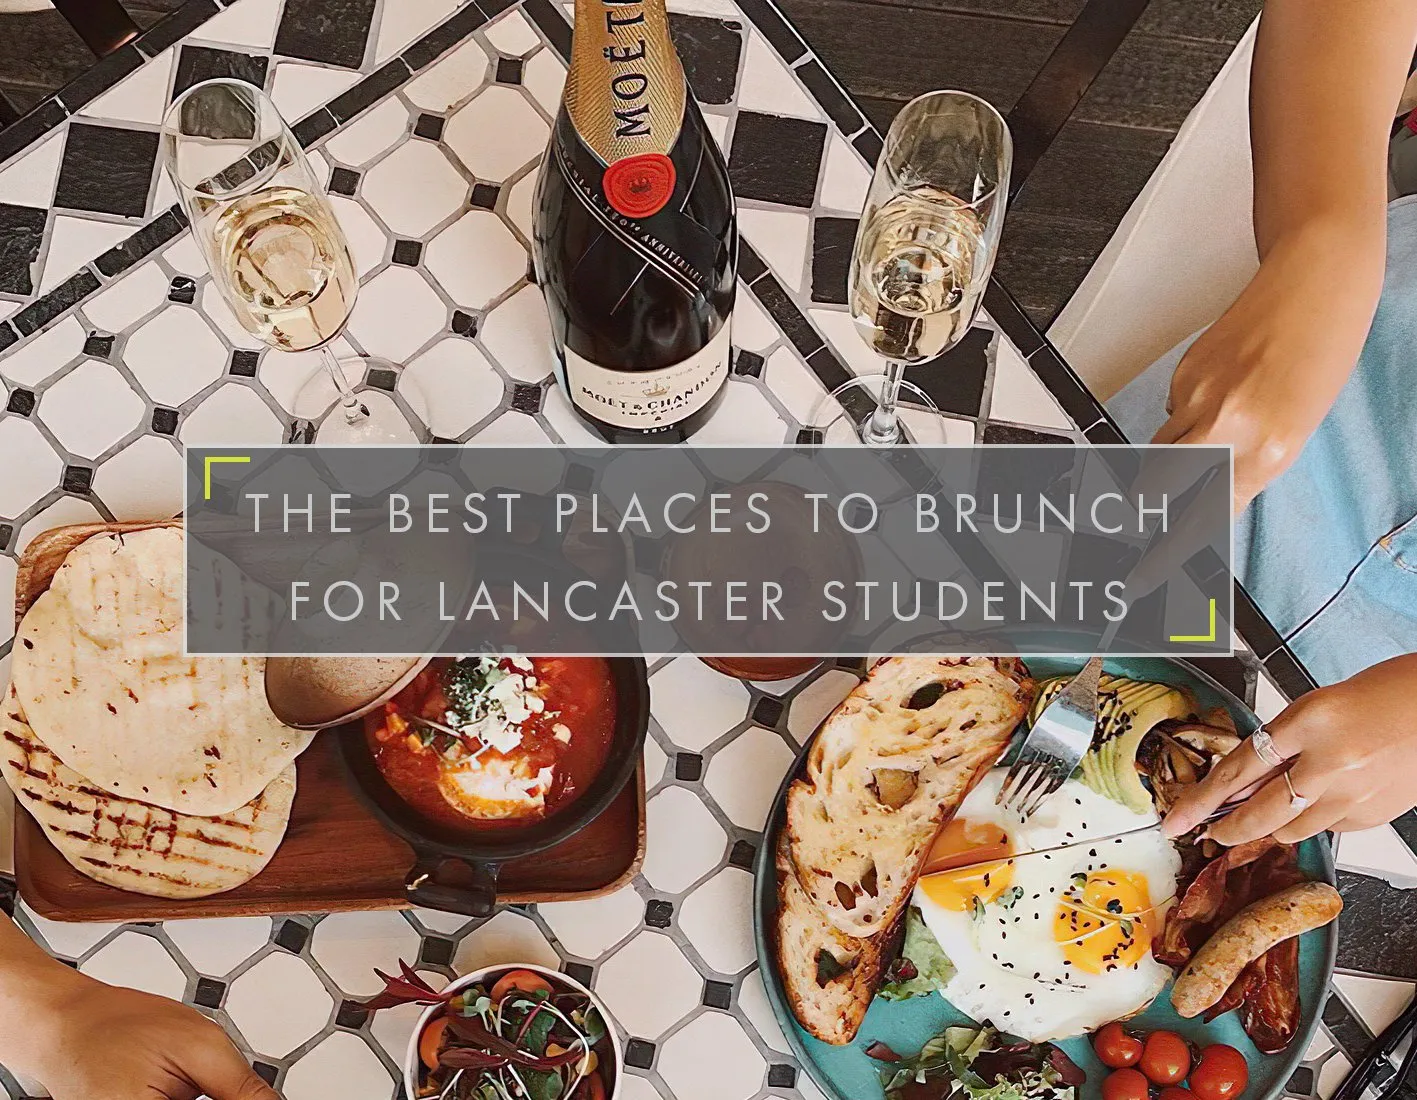 THE BEST PLACES TO BRUNCH FOR LANCASTER STUDENTS